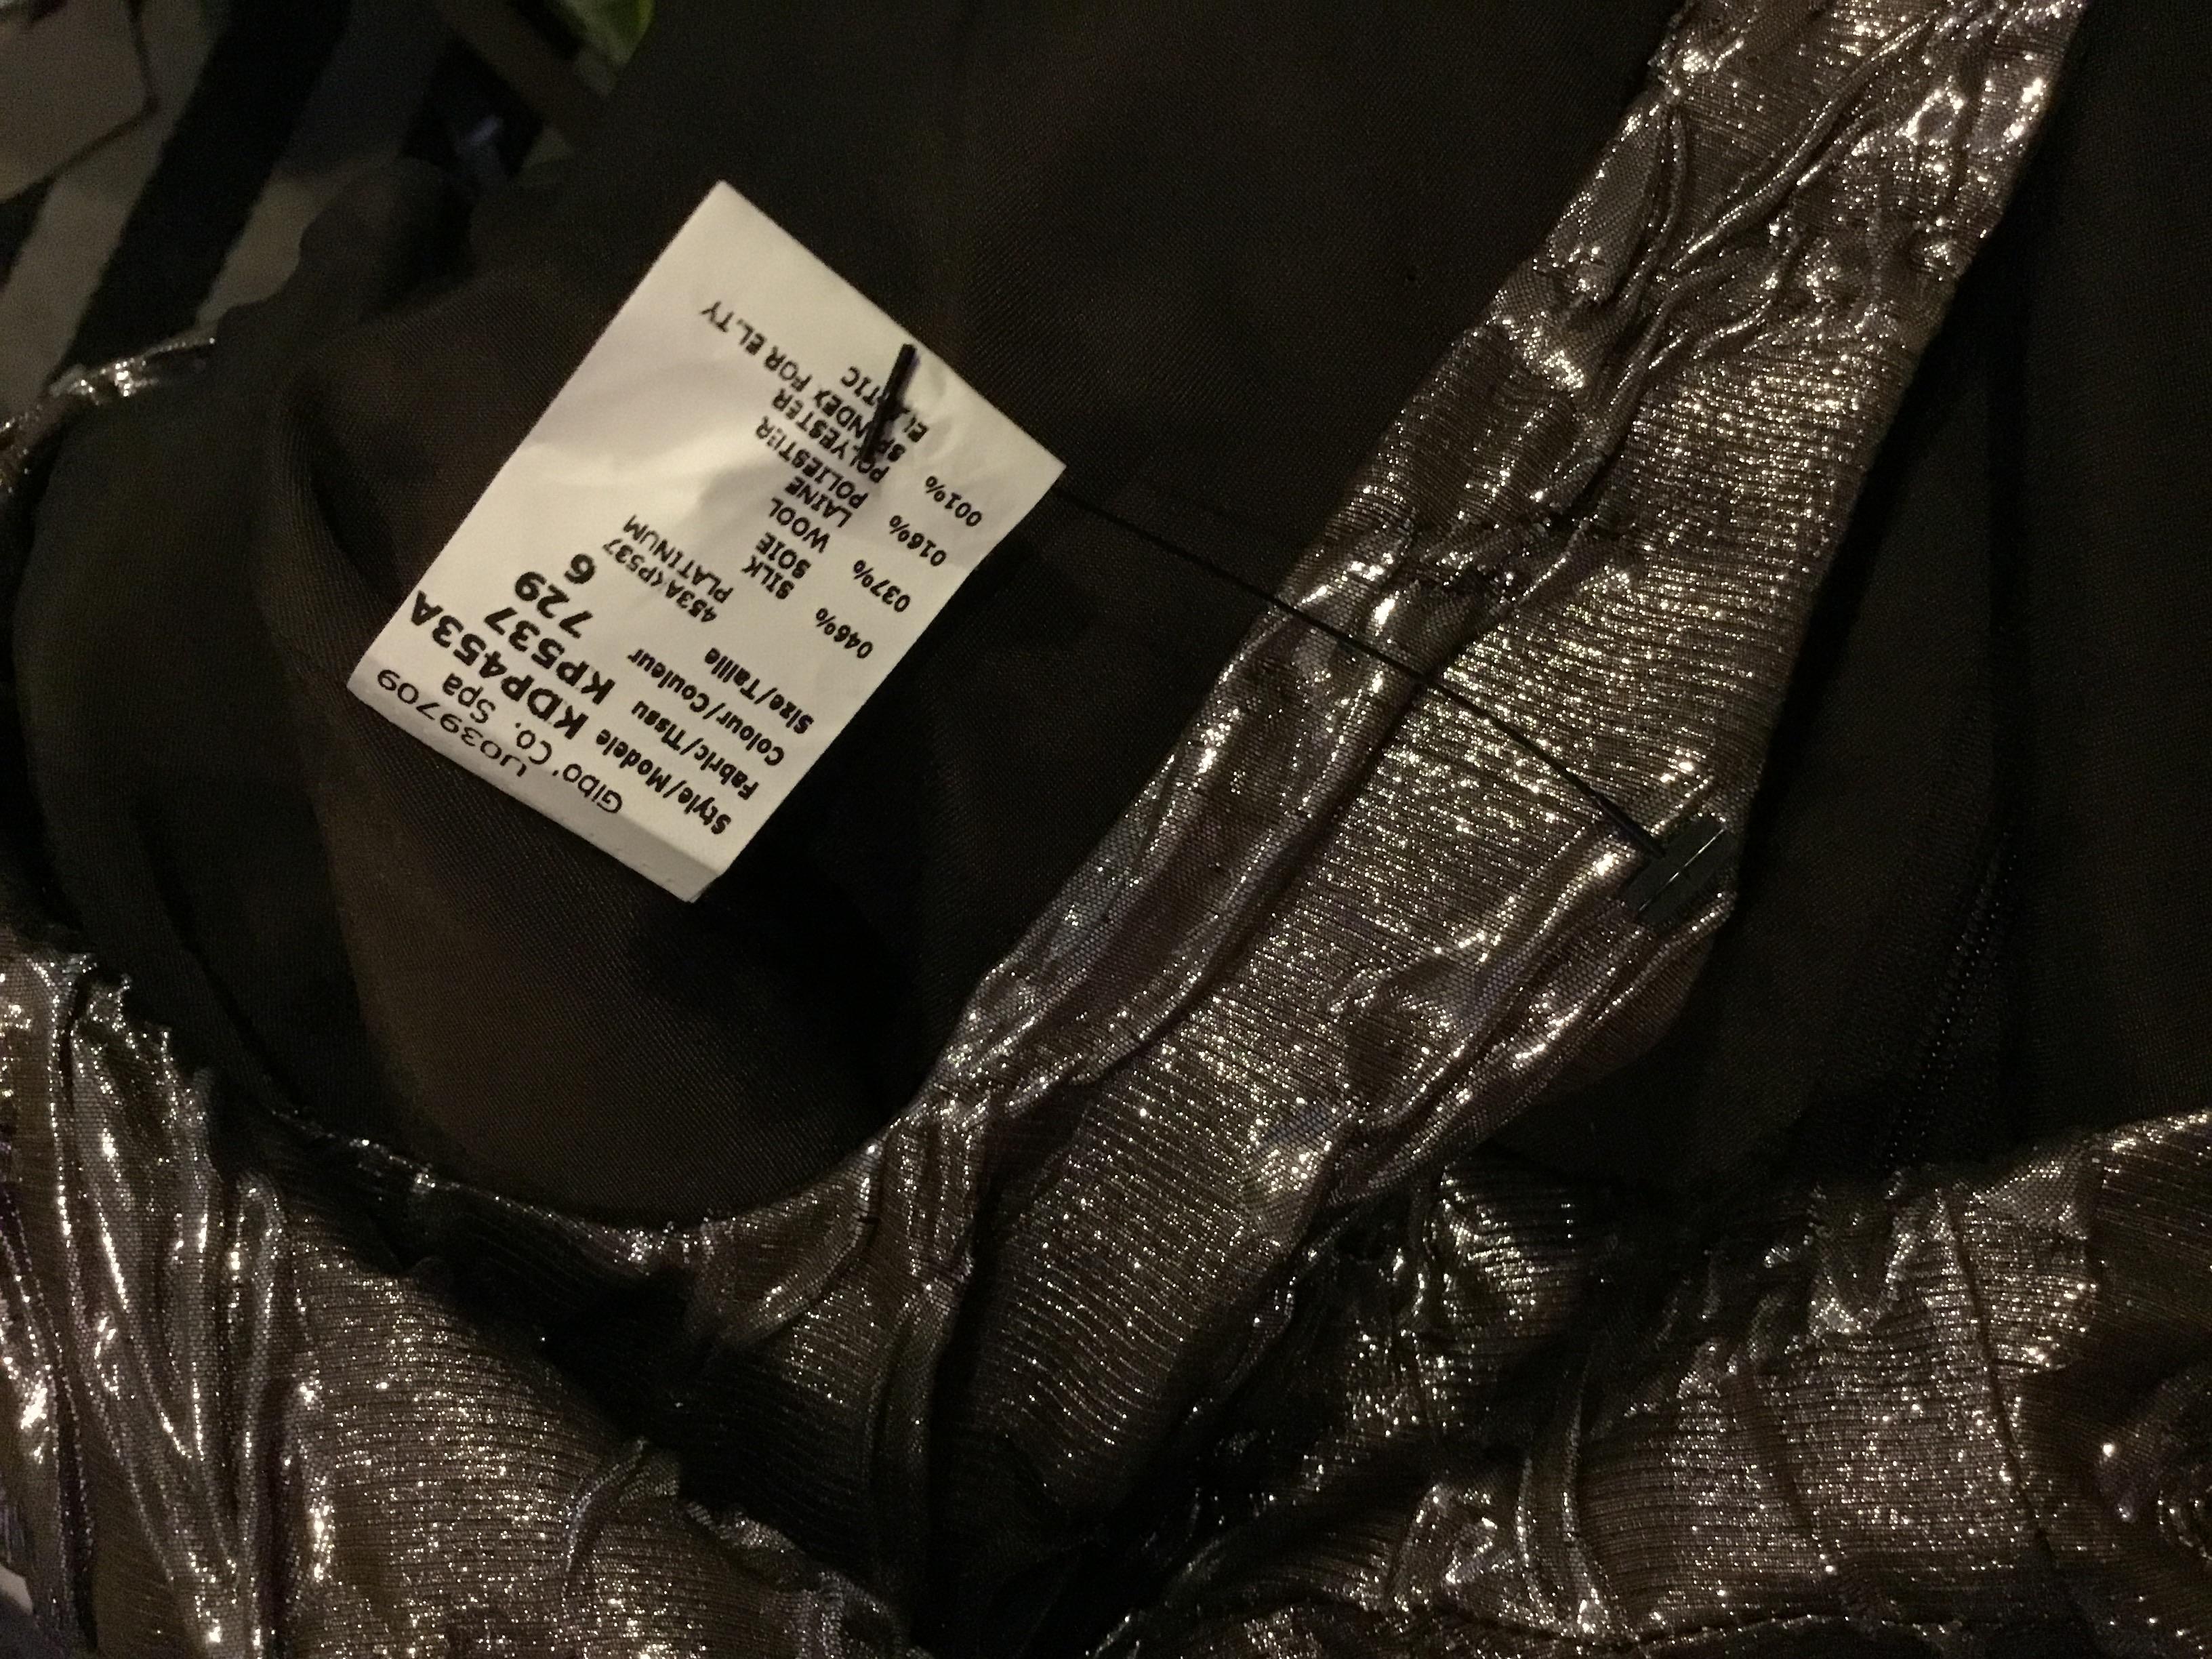 Michael Kors Collection Italy Floral Embossed Metallic Sleeveless Dress Size 6 In Good Condition For Sale In Palm Springs, CA